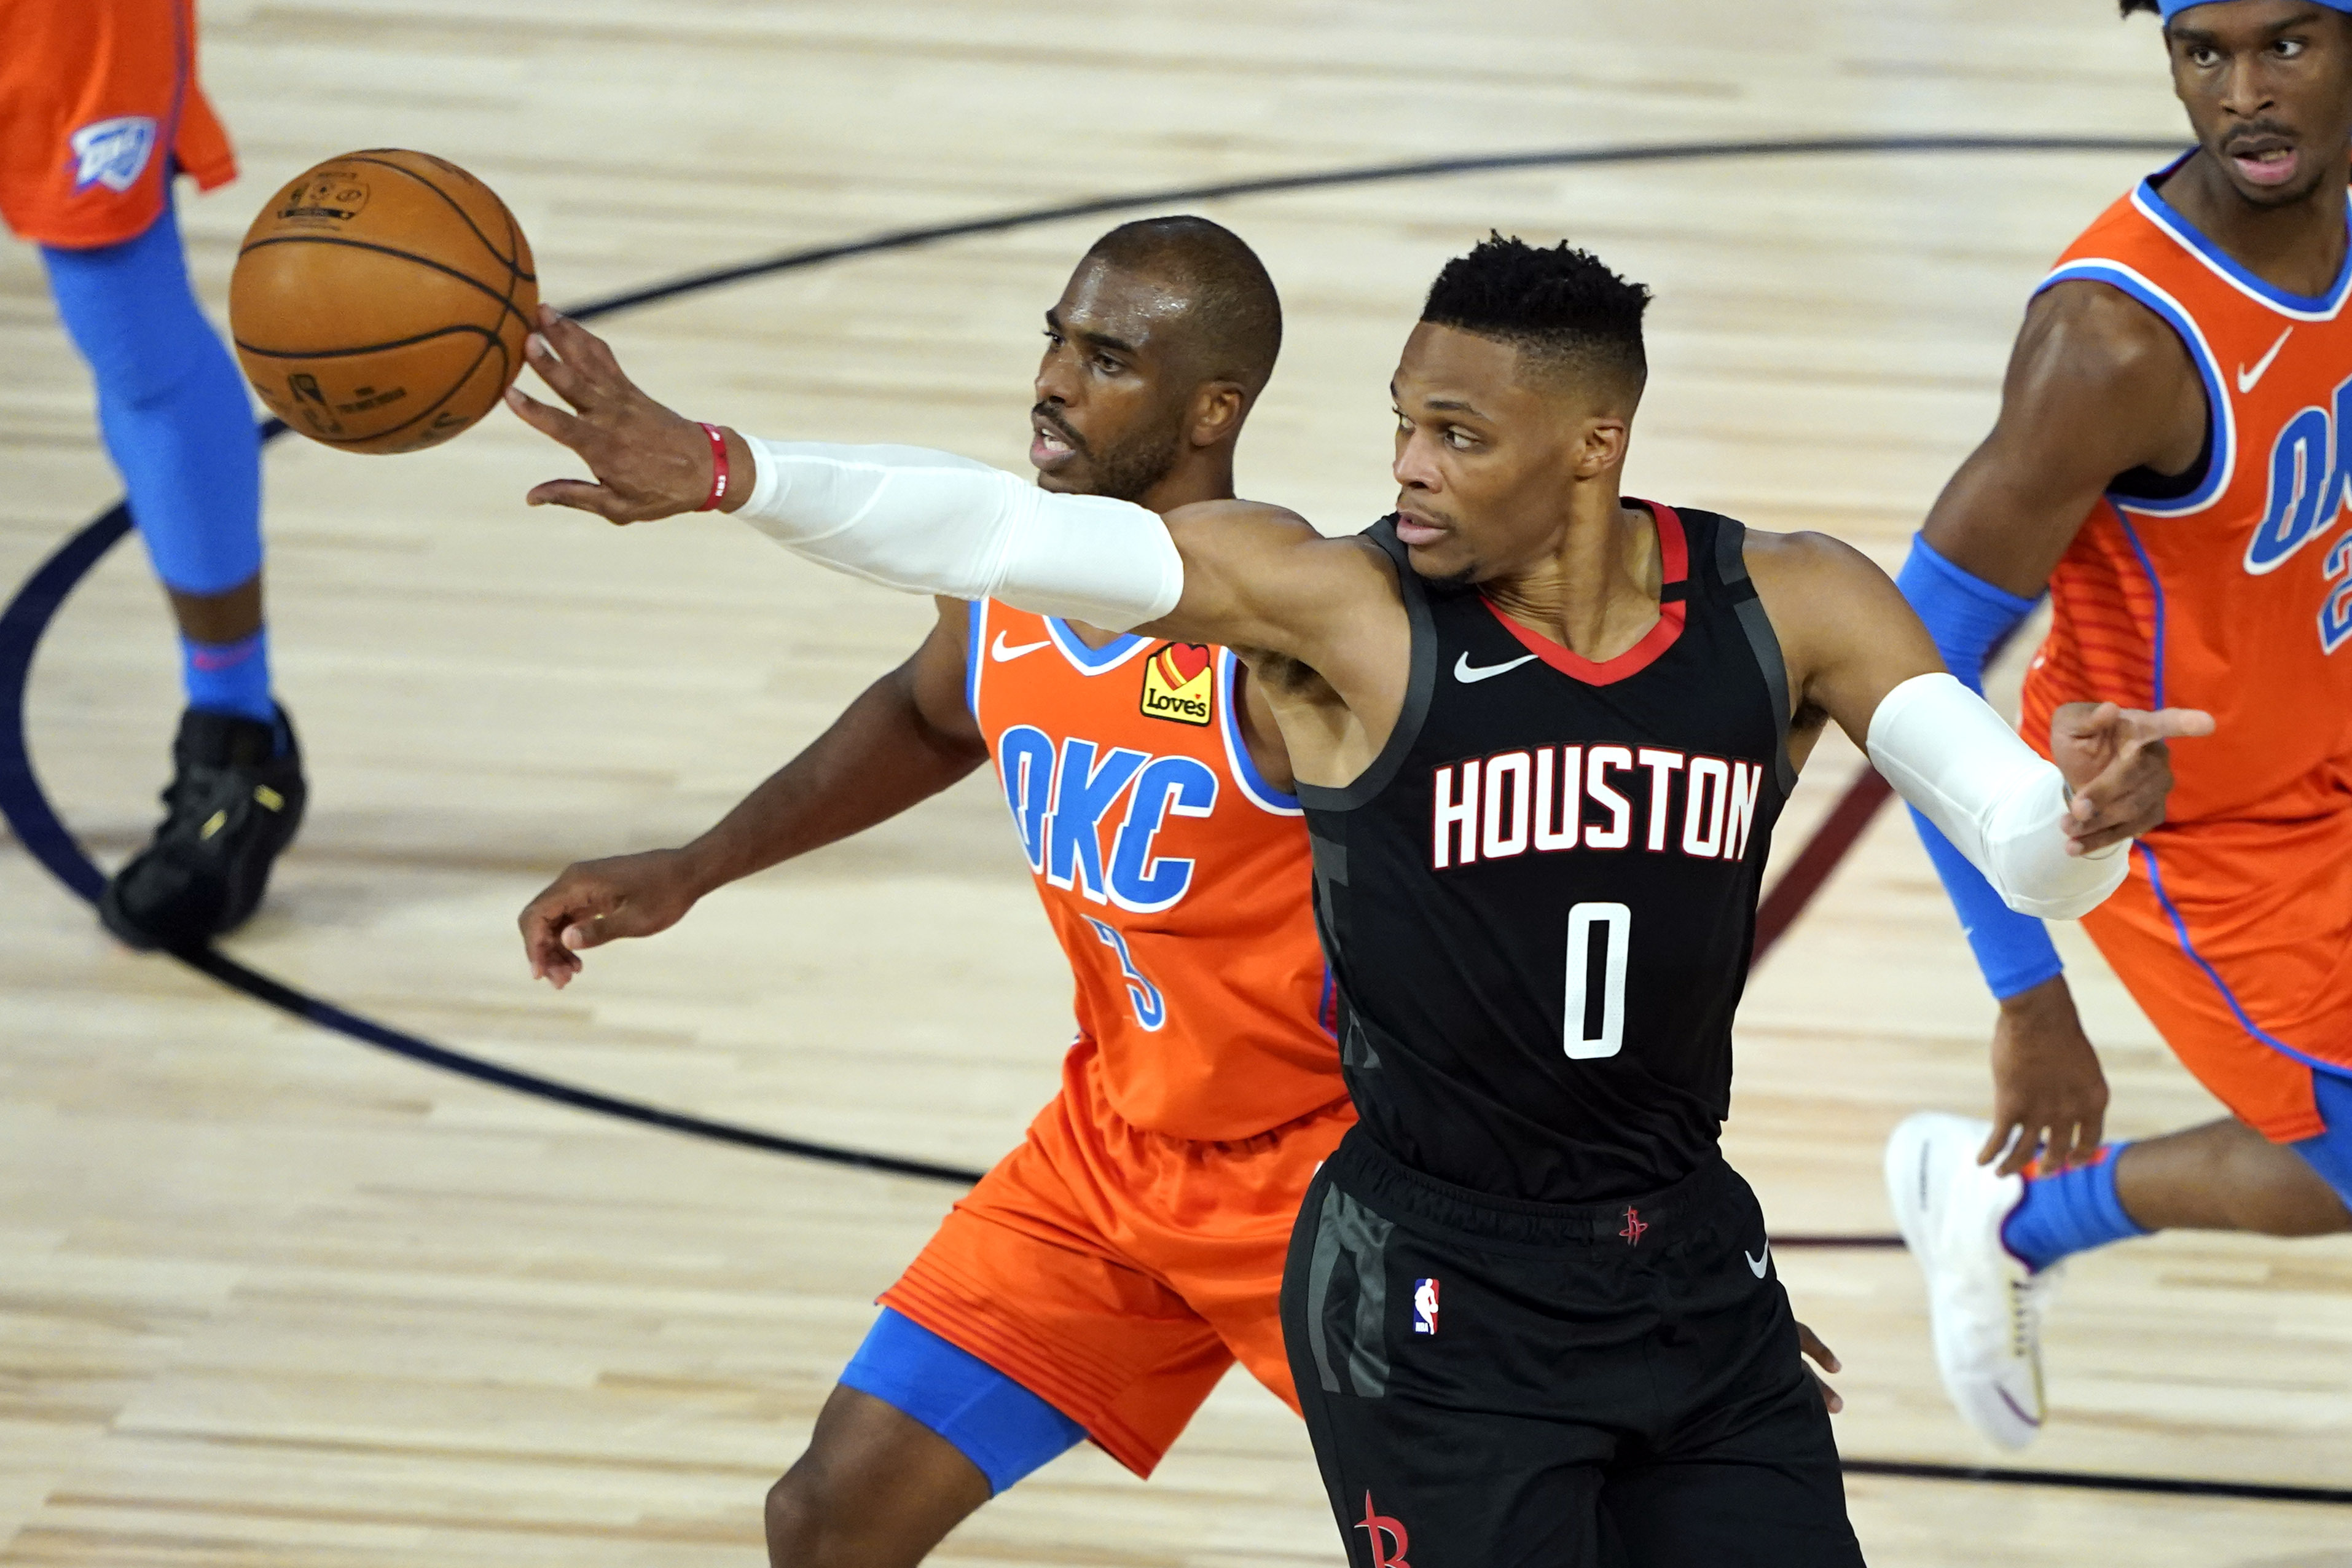 NBA Playoffs TV Schedule (8/31/20) Watch NBA online without cable FREE live streams for Heat-Bucks, Rockets-Thunder